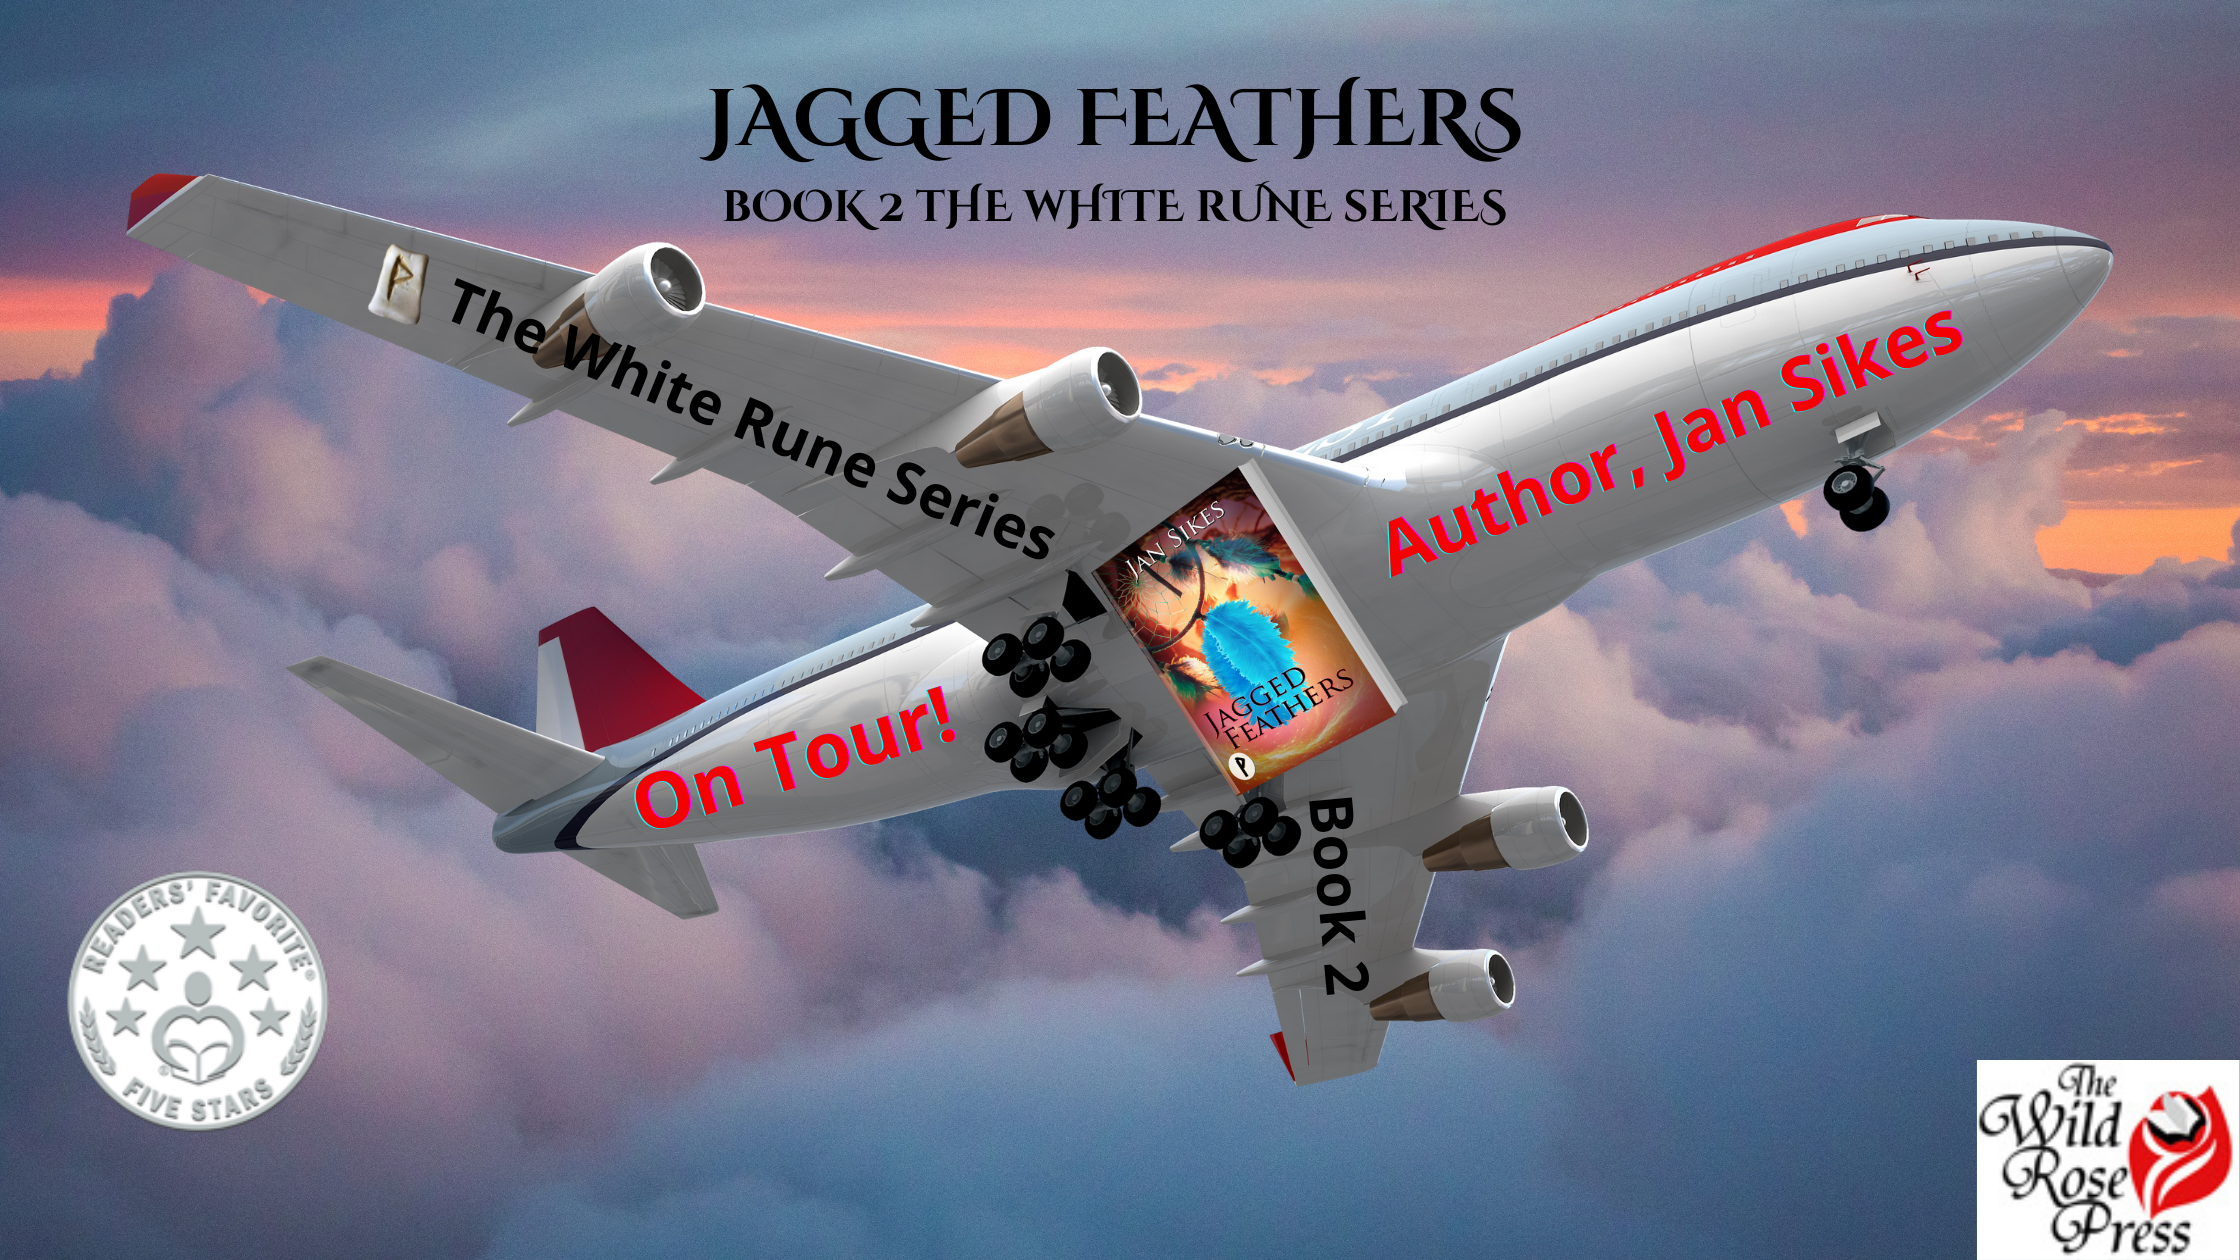 Jagged Feathers blog tour banner showing aeroplane